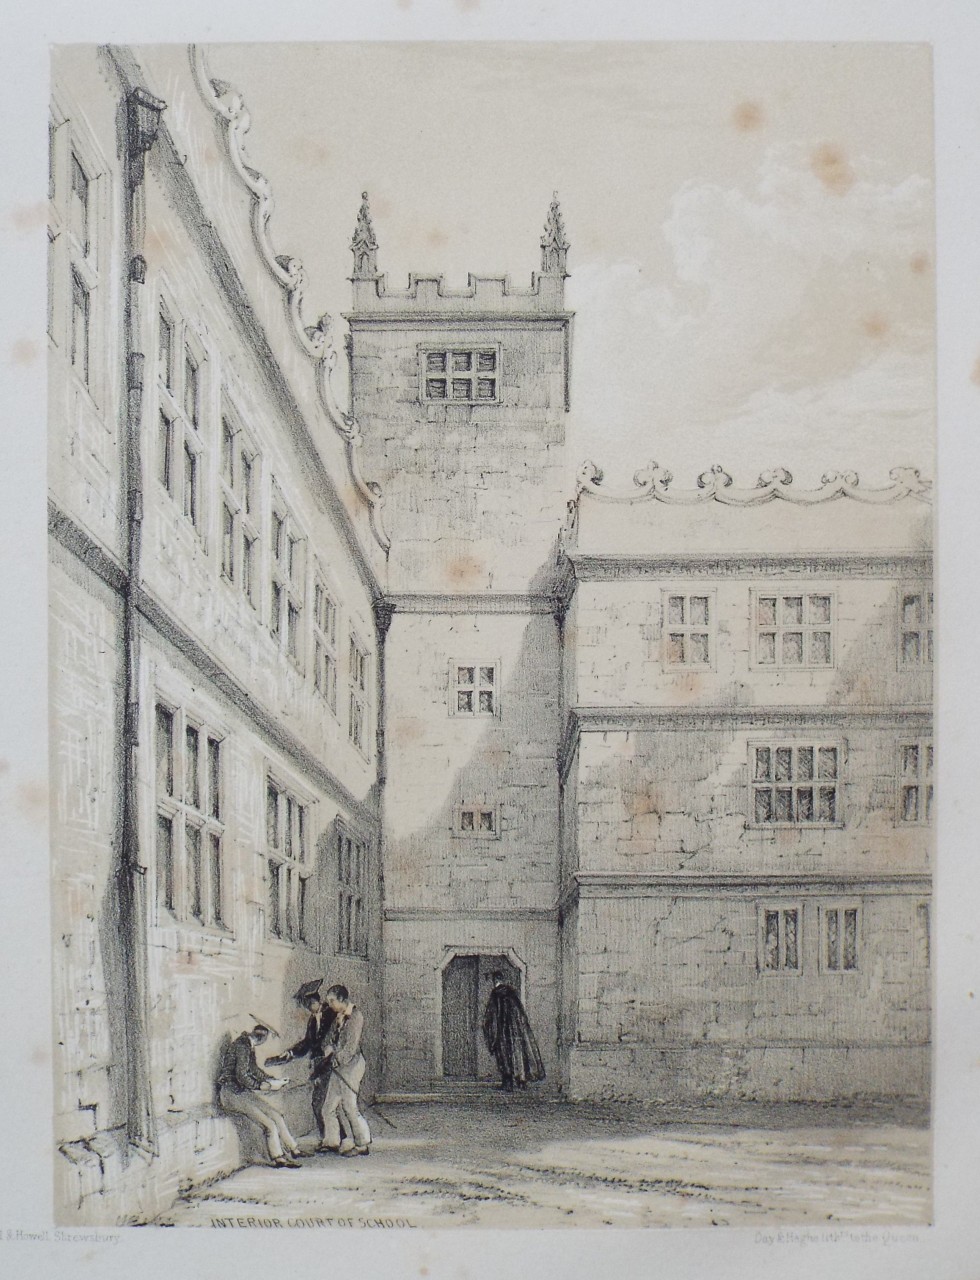 Lithograph - Interior Court of School. - Radclyffe